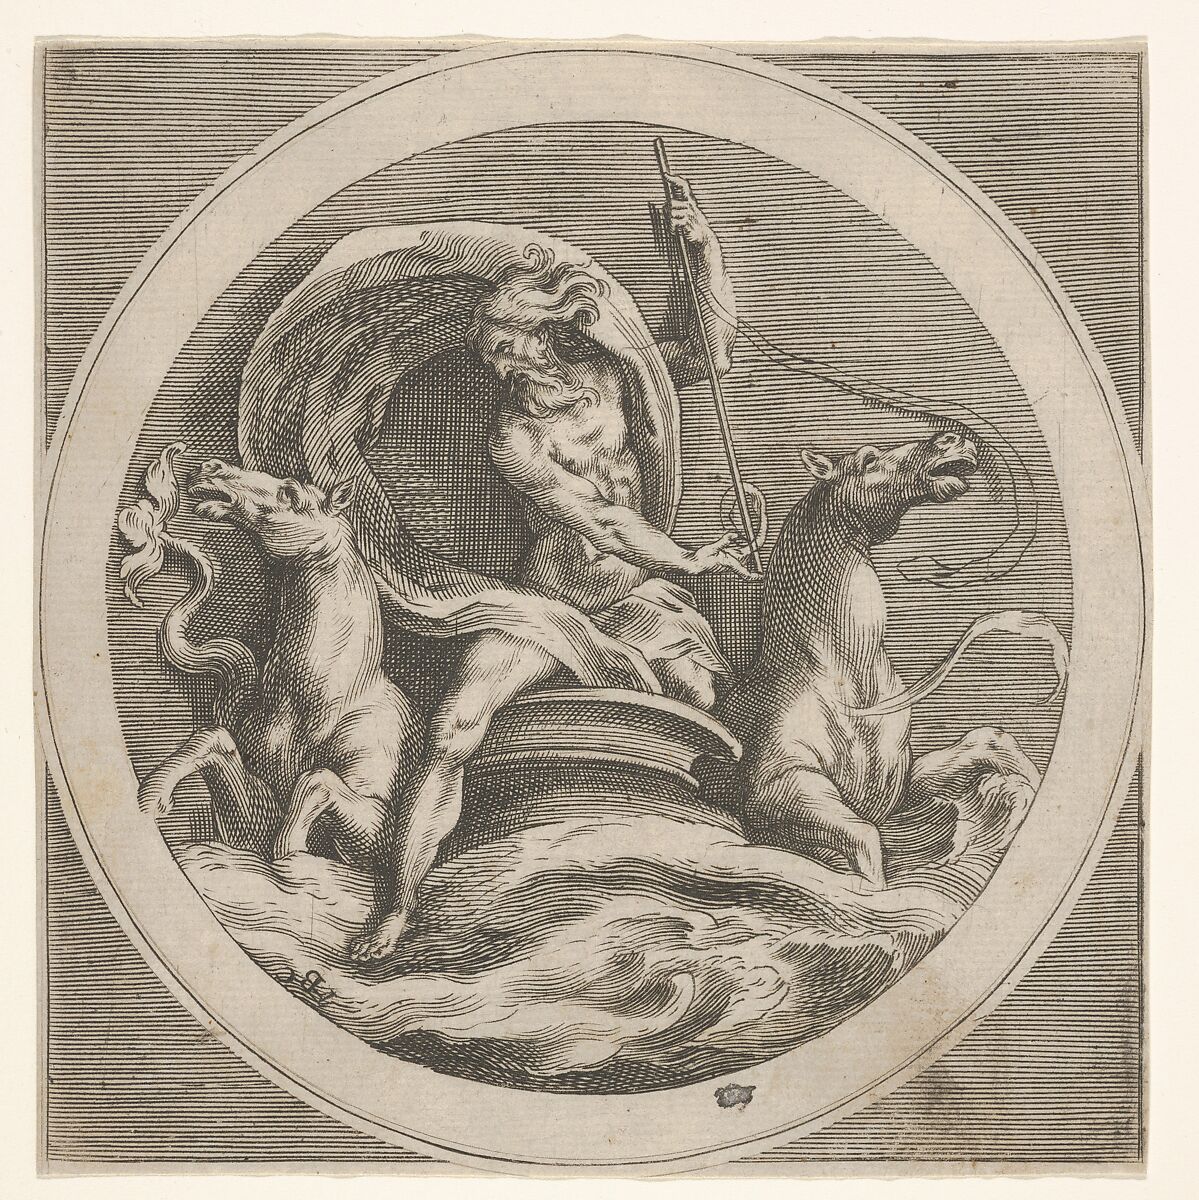 Neptune rising from the sea and bearing a staff, accompanied by two horse-headed sea creatures, reverse copy after a series of engravings by Cherubino Alberti of mythological scenes after Polidoro da Caravaggio, Anonymous, Engraving 